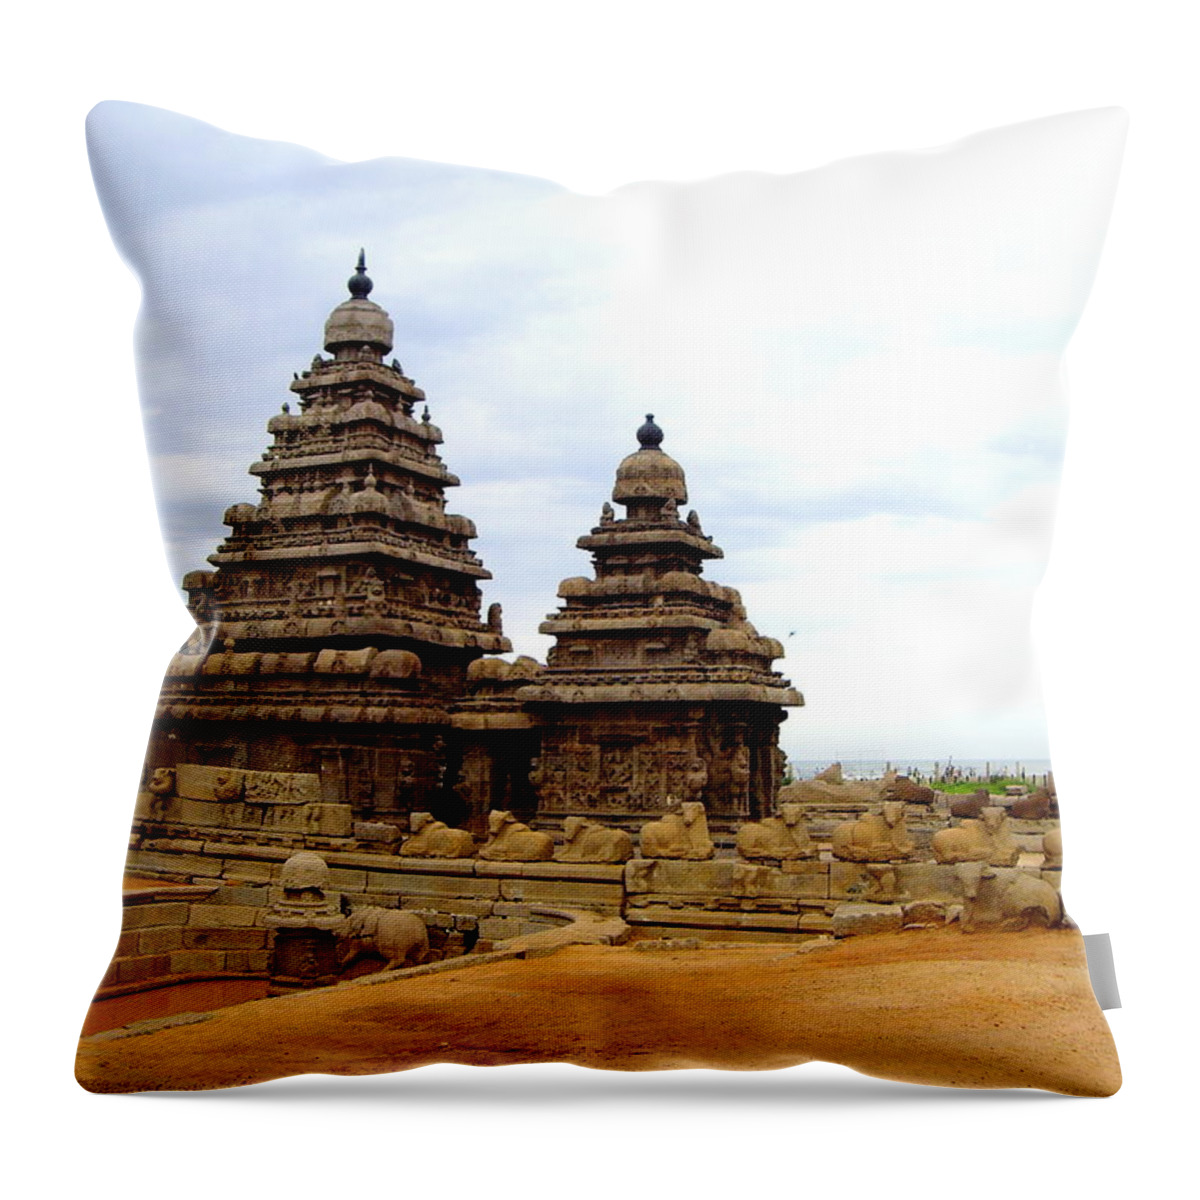 Tranquility Throw Pillow featuring the photograph Mahaballipuram, S India, Tamil Nadu by Chris Ilsley